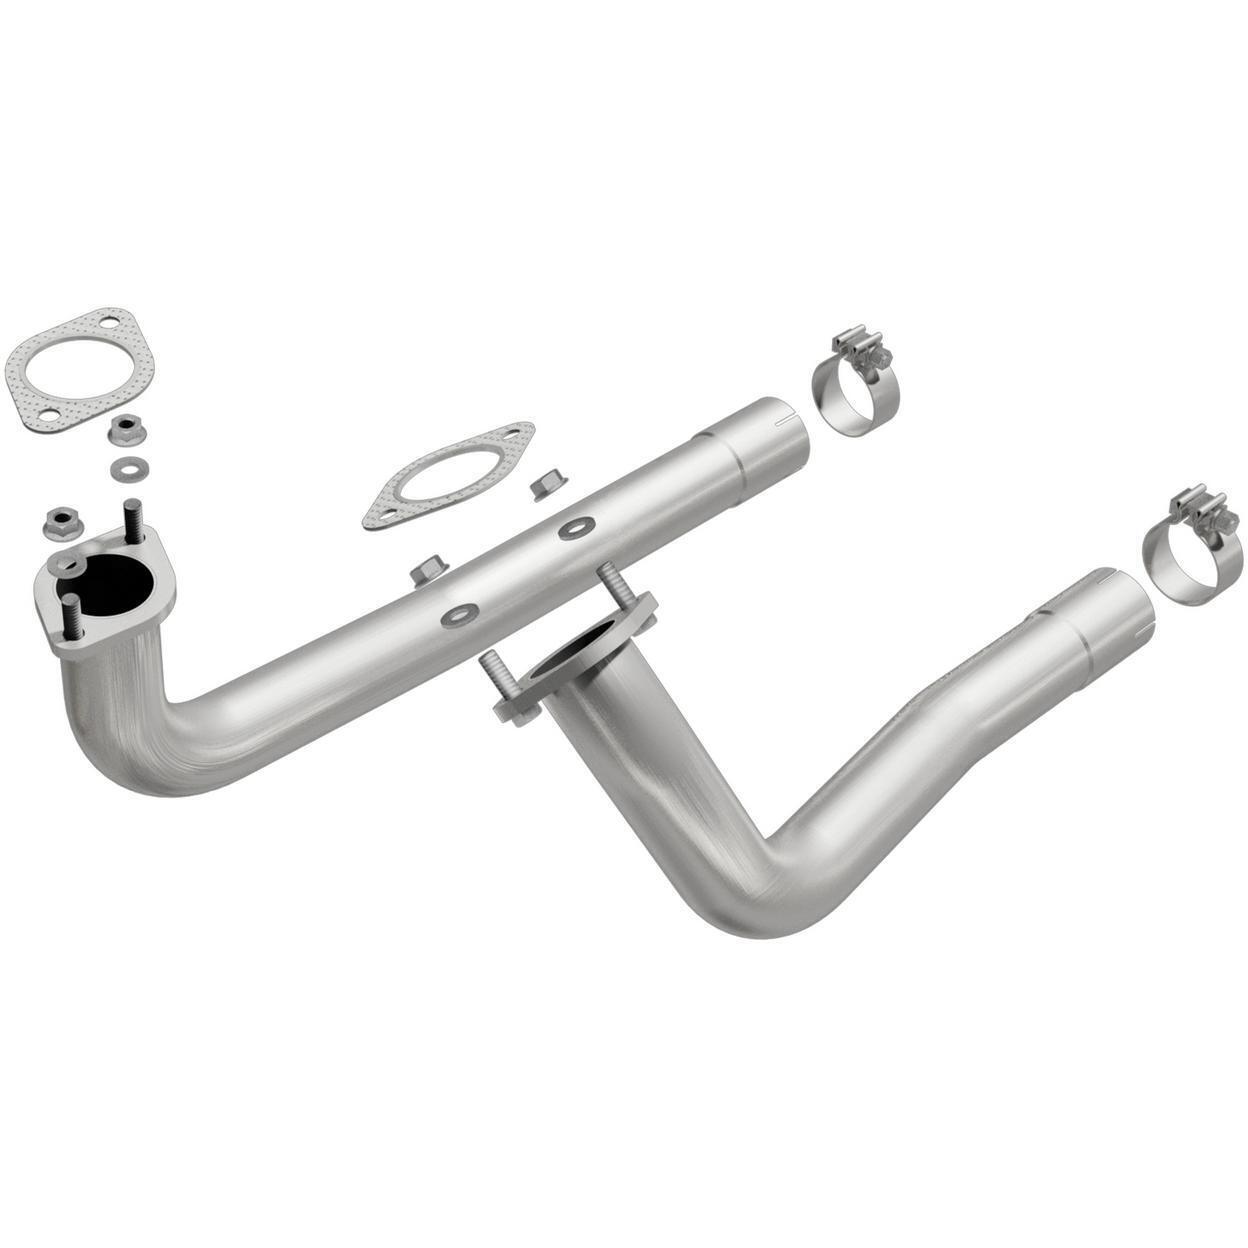 Exhaust Pipe for 1970-1973 Dodge Coronet 7.2L V8 GAS U/K